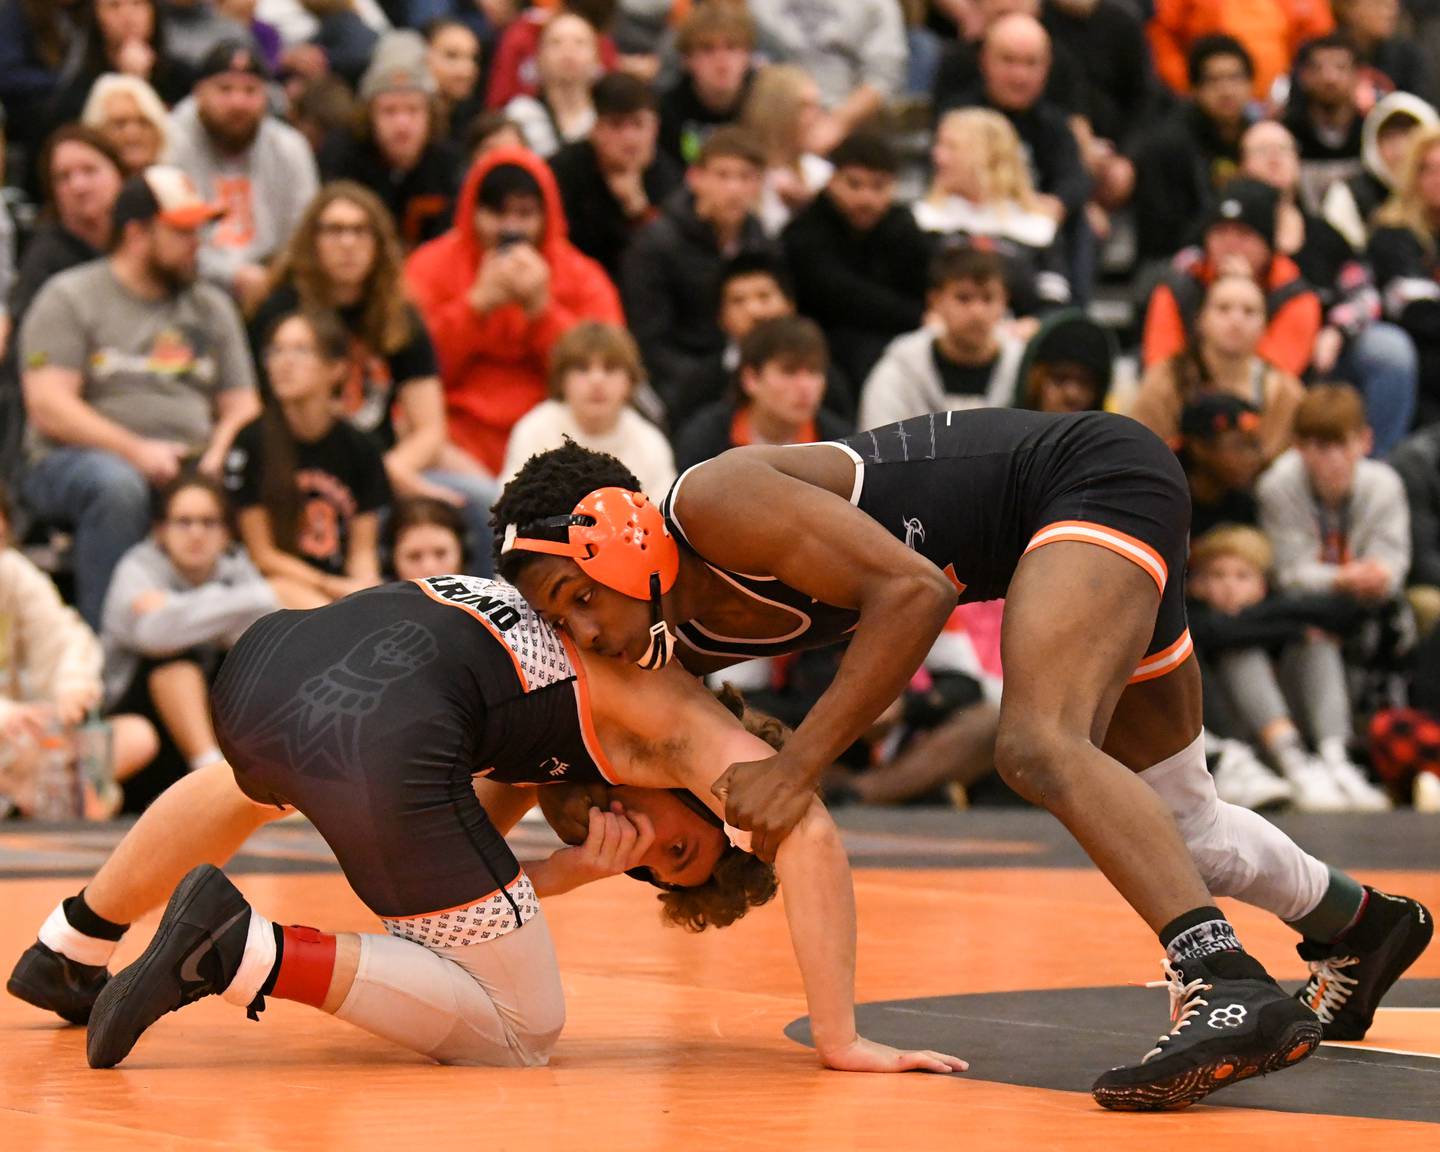 AJ Marino of St. Charles East wrestles Jalen Airhart in the 120 weight class on Friday Dec. 30th where AJ took the win over Jalen in the first round of Friday’s Dec. 30th portion of The Don Flavin wrestling Invite held at DeKalb High School.